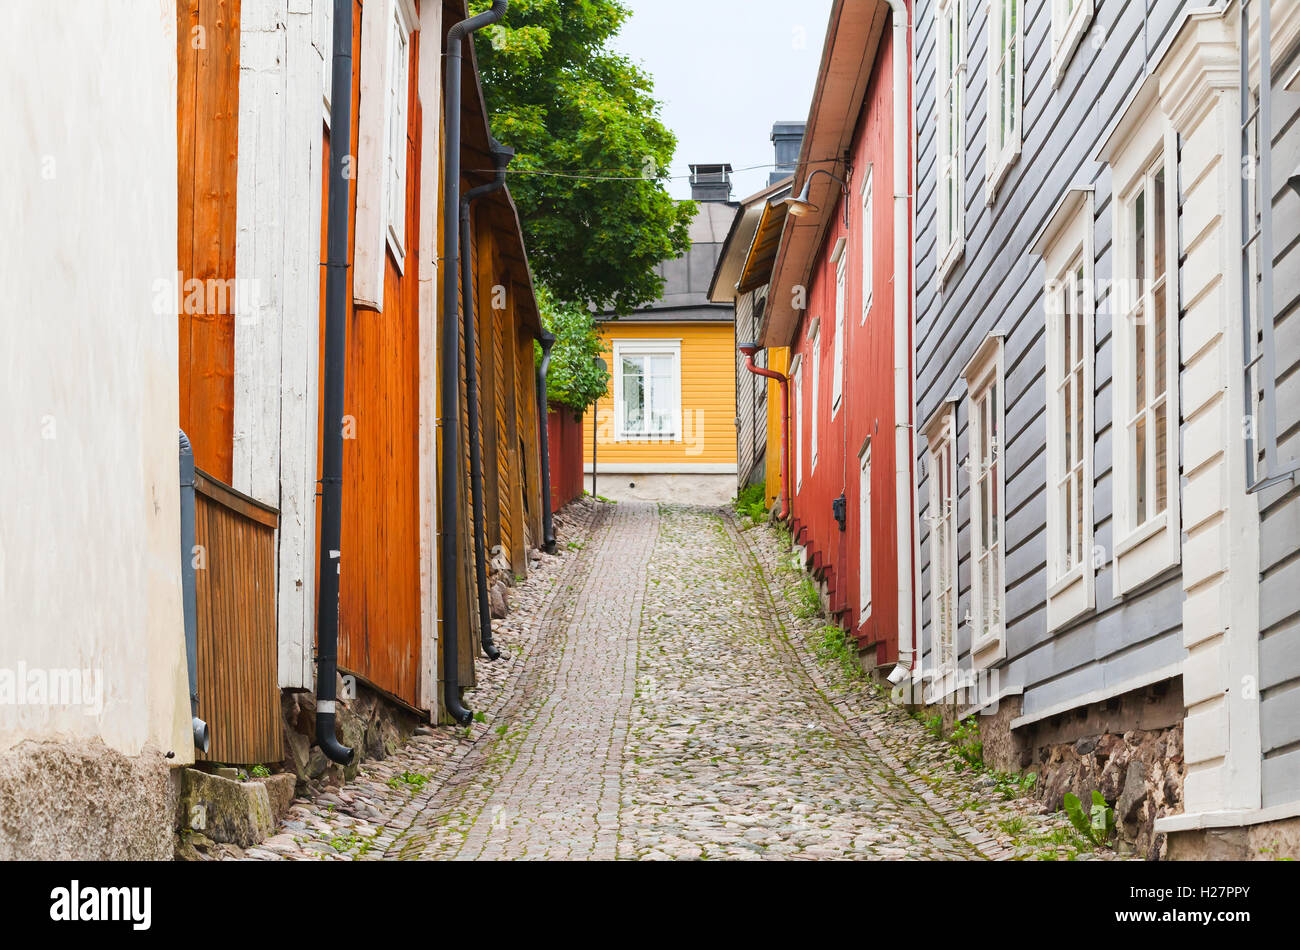 Street view perspective with colorful wooden houses in old town of Porvoo, Finland Stock Photo